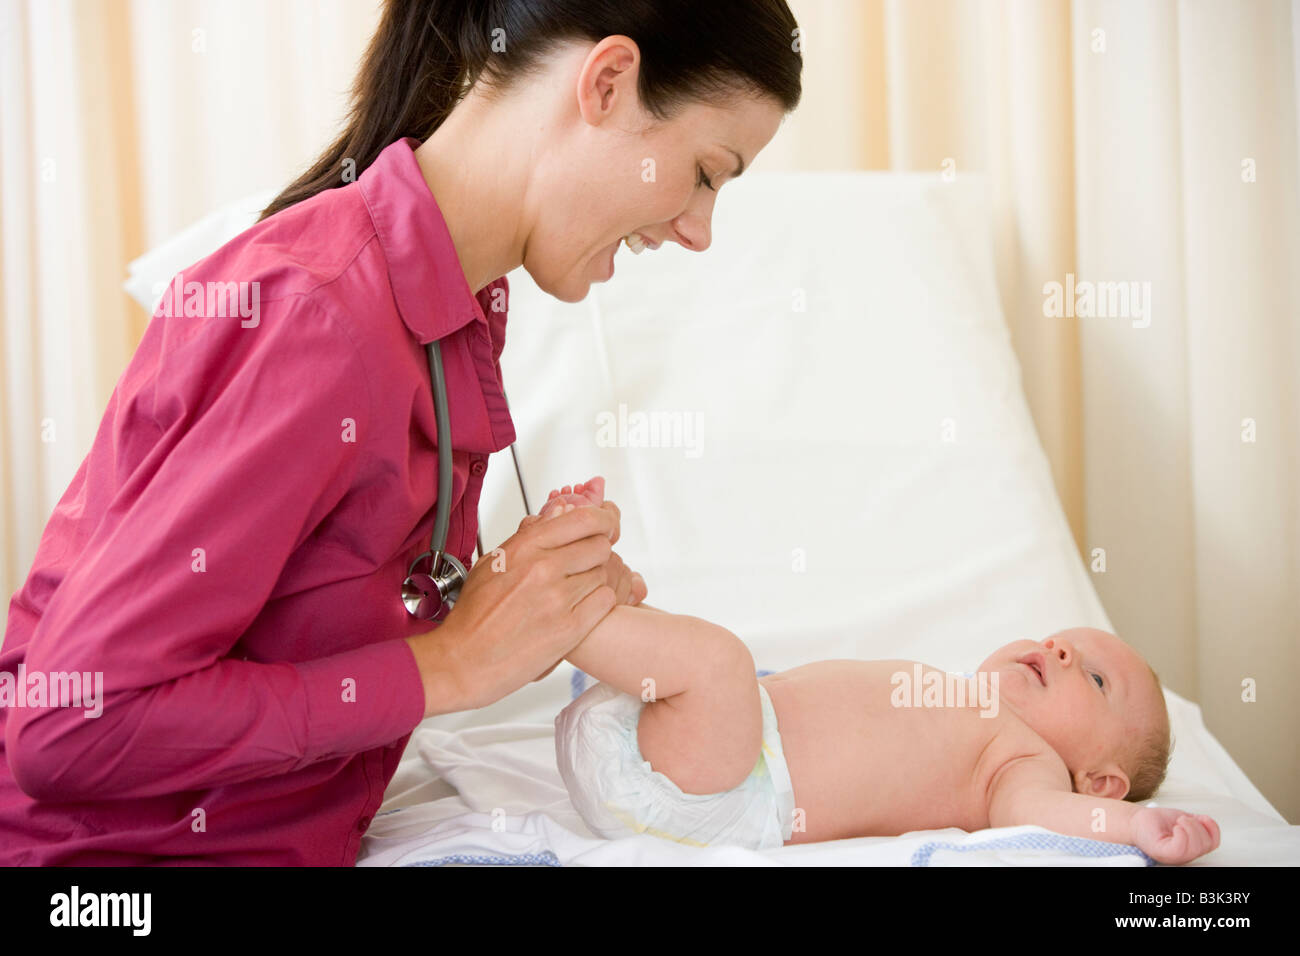 Doctor giving checkup to baby in exam room smiling Stock Photo